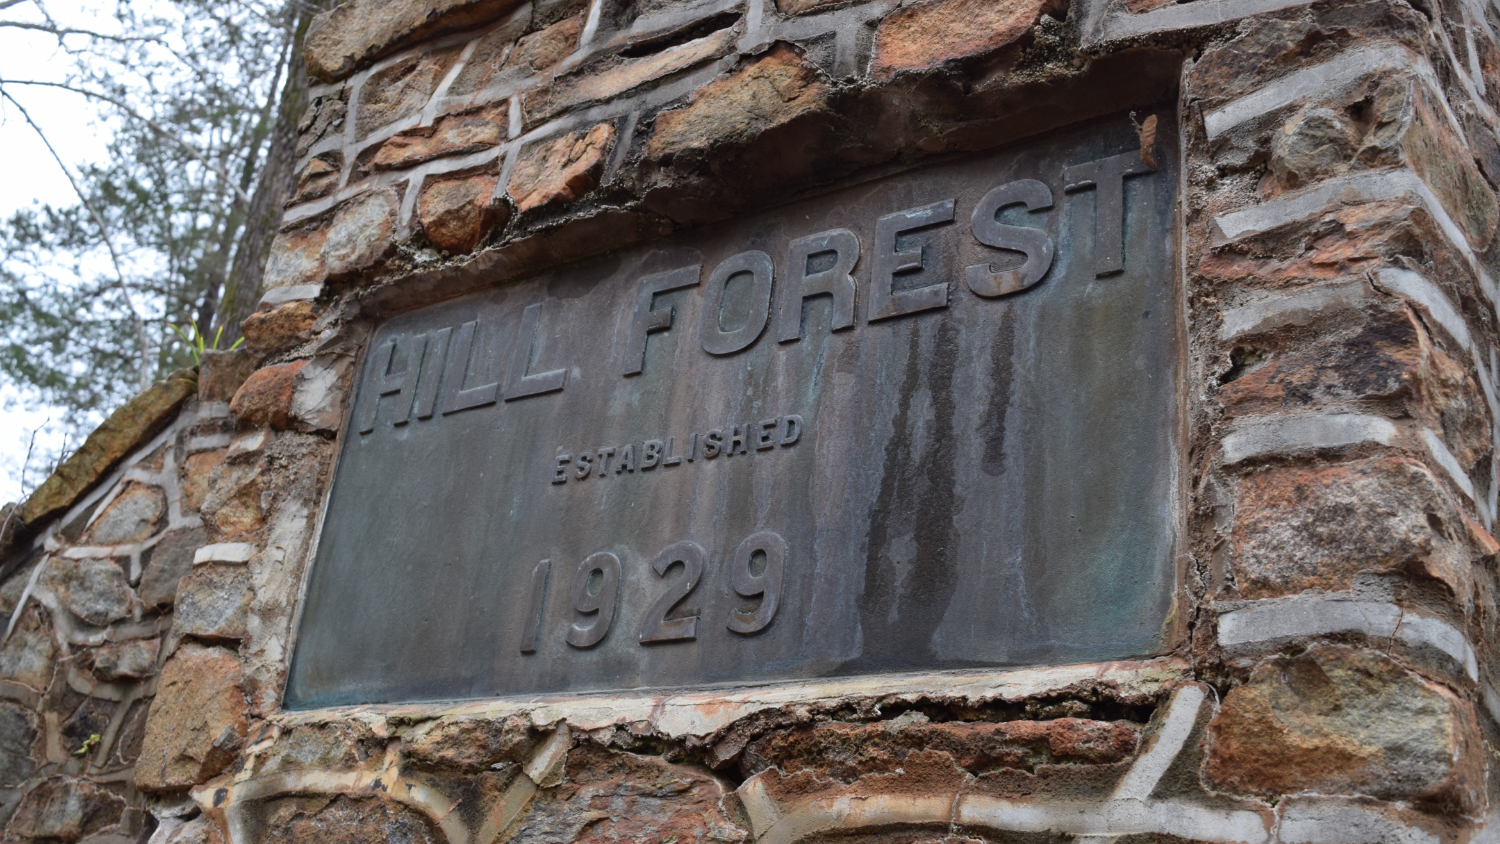 Hill Forest Est 1929 sign - Support Slocum Camp - College of Natural Resources NC State University